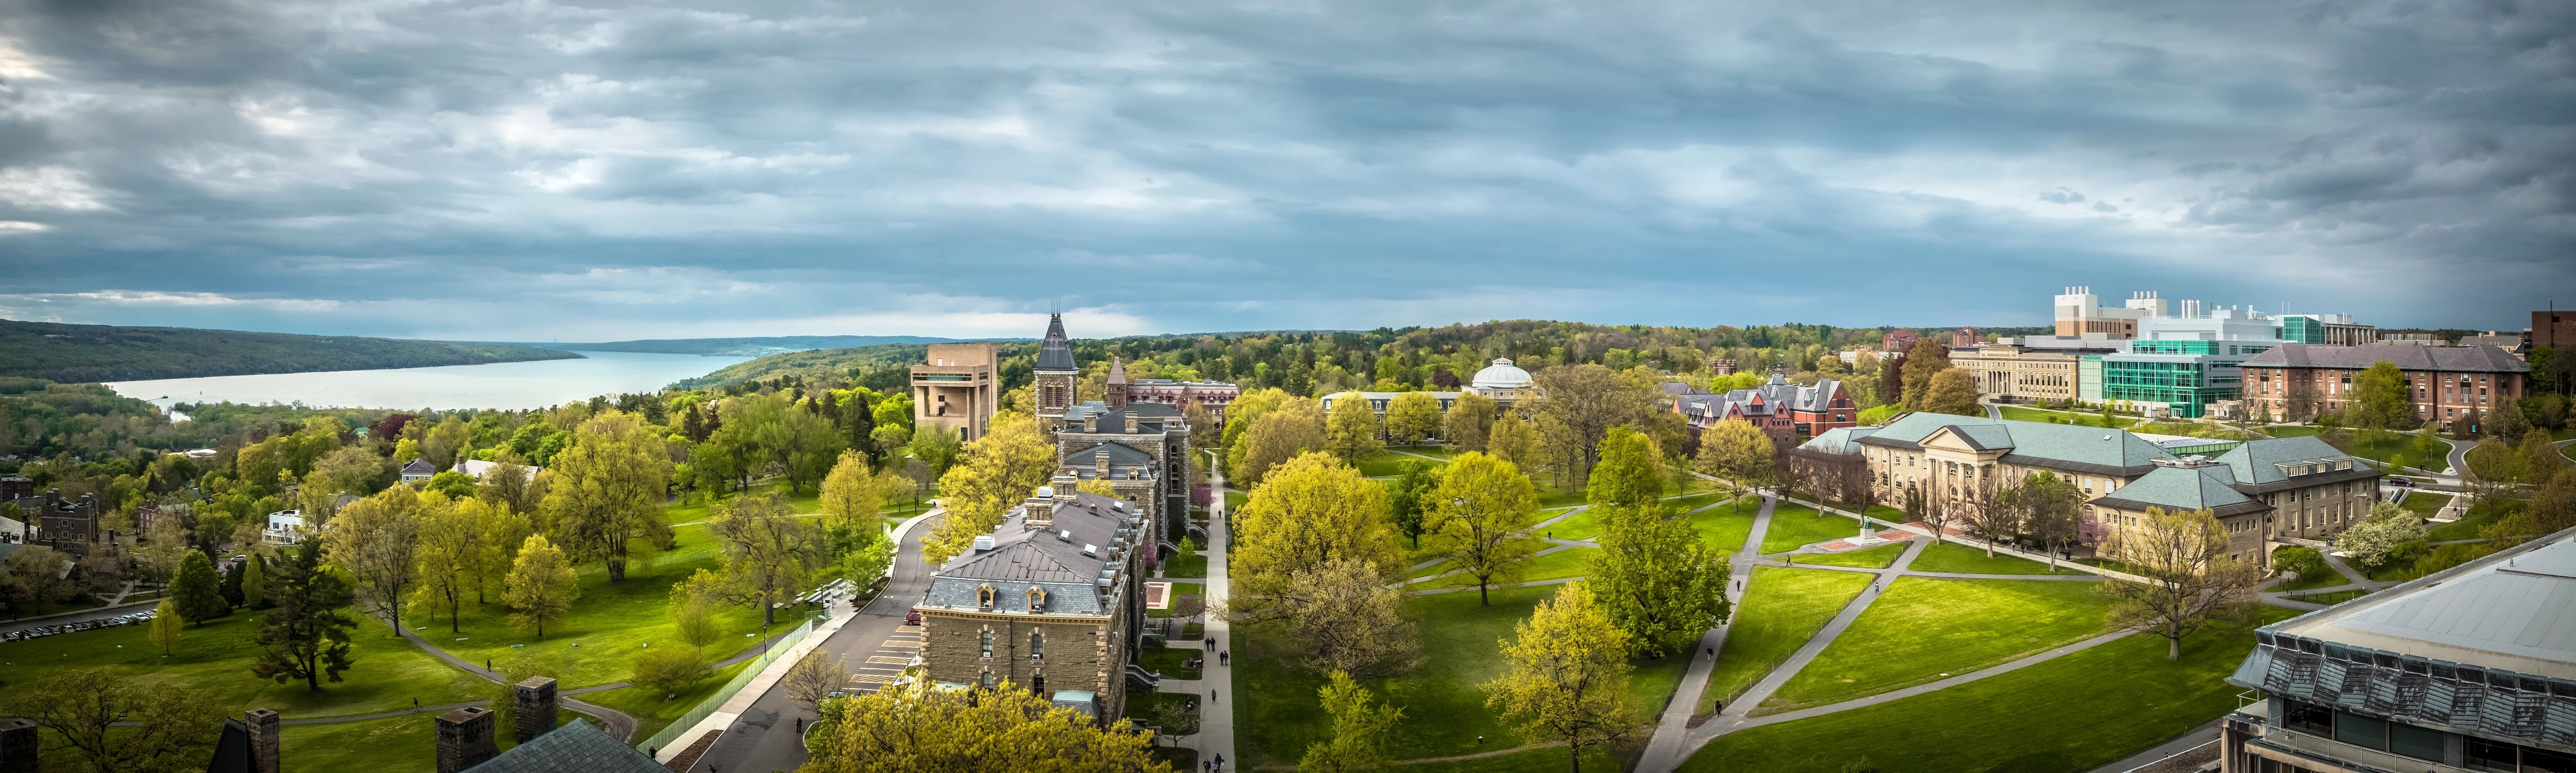 Aerial view of Cornell Campus